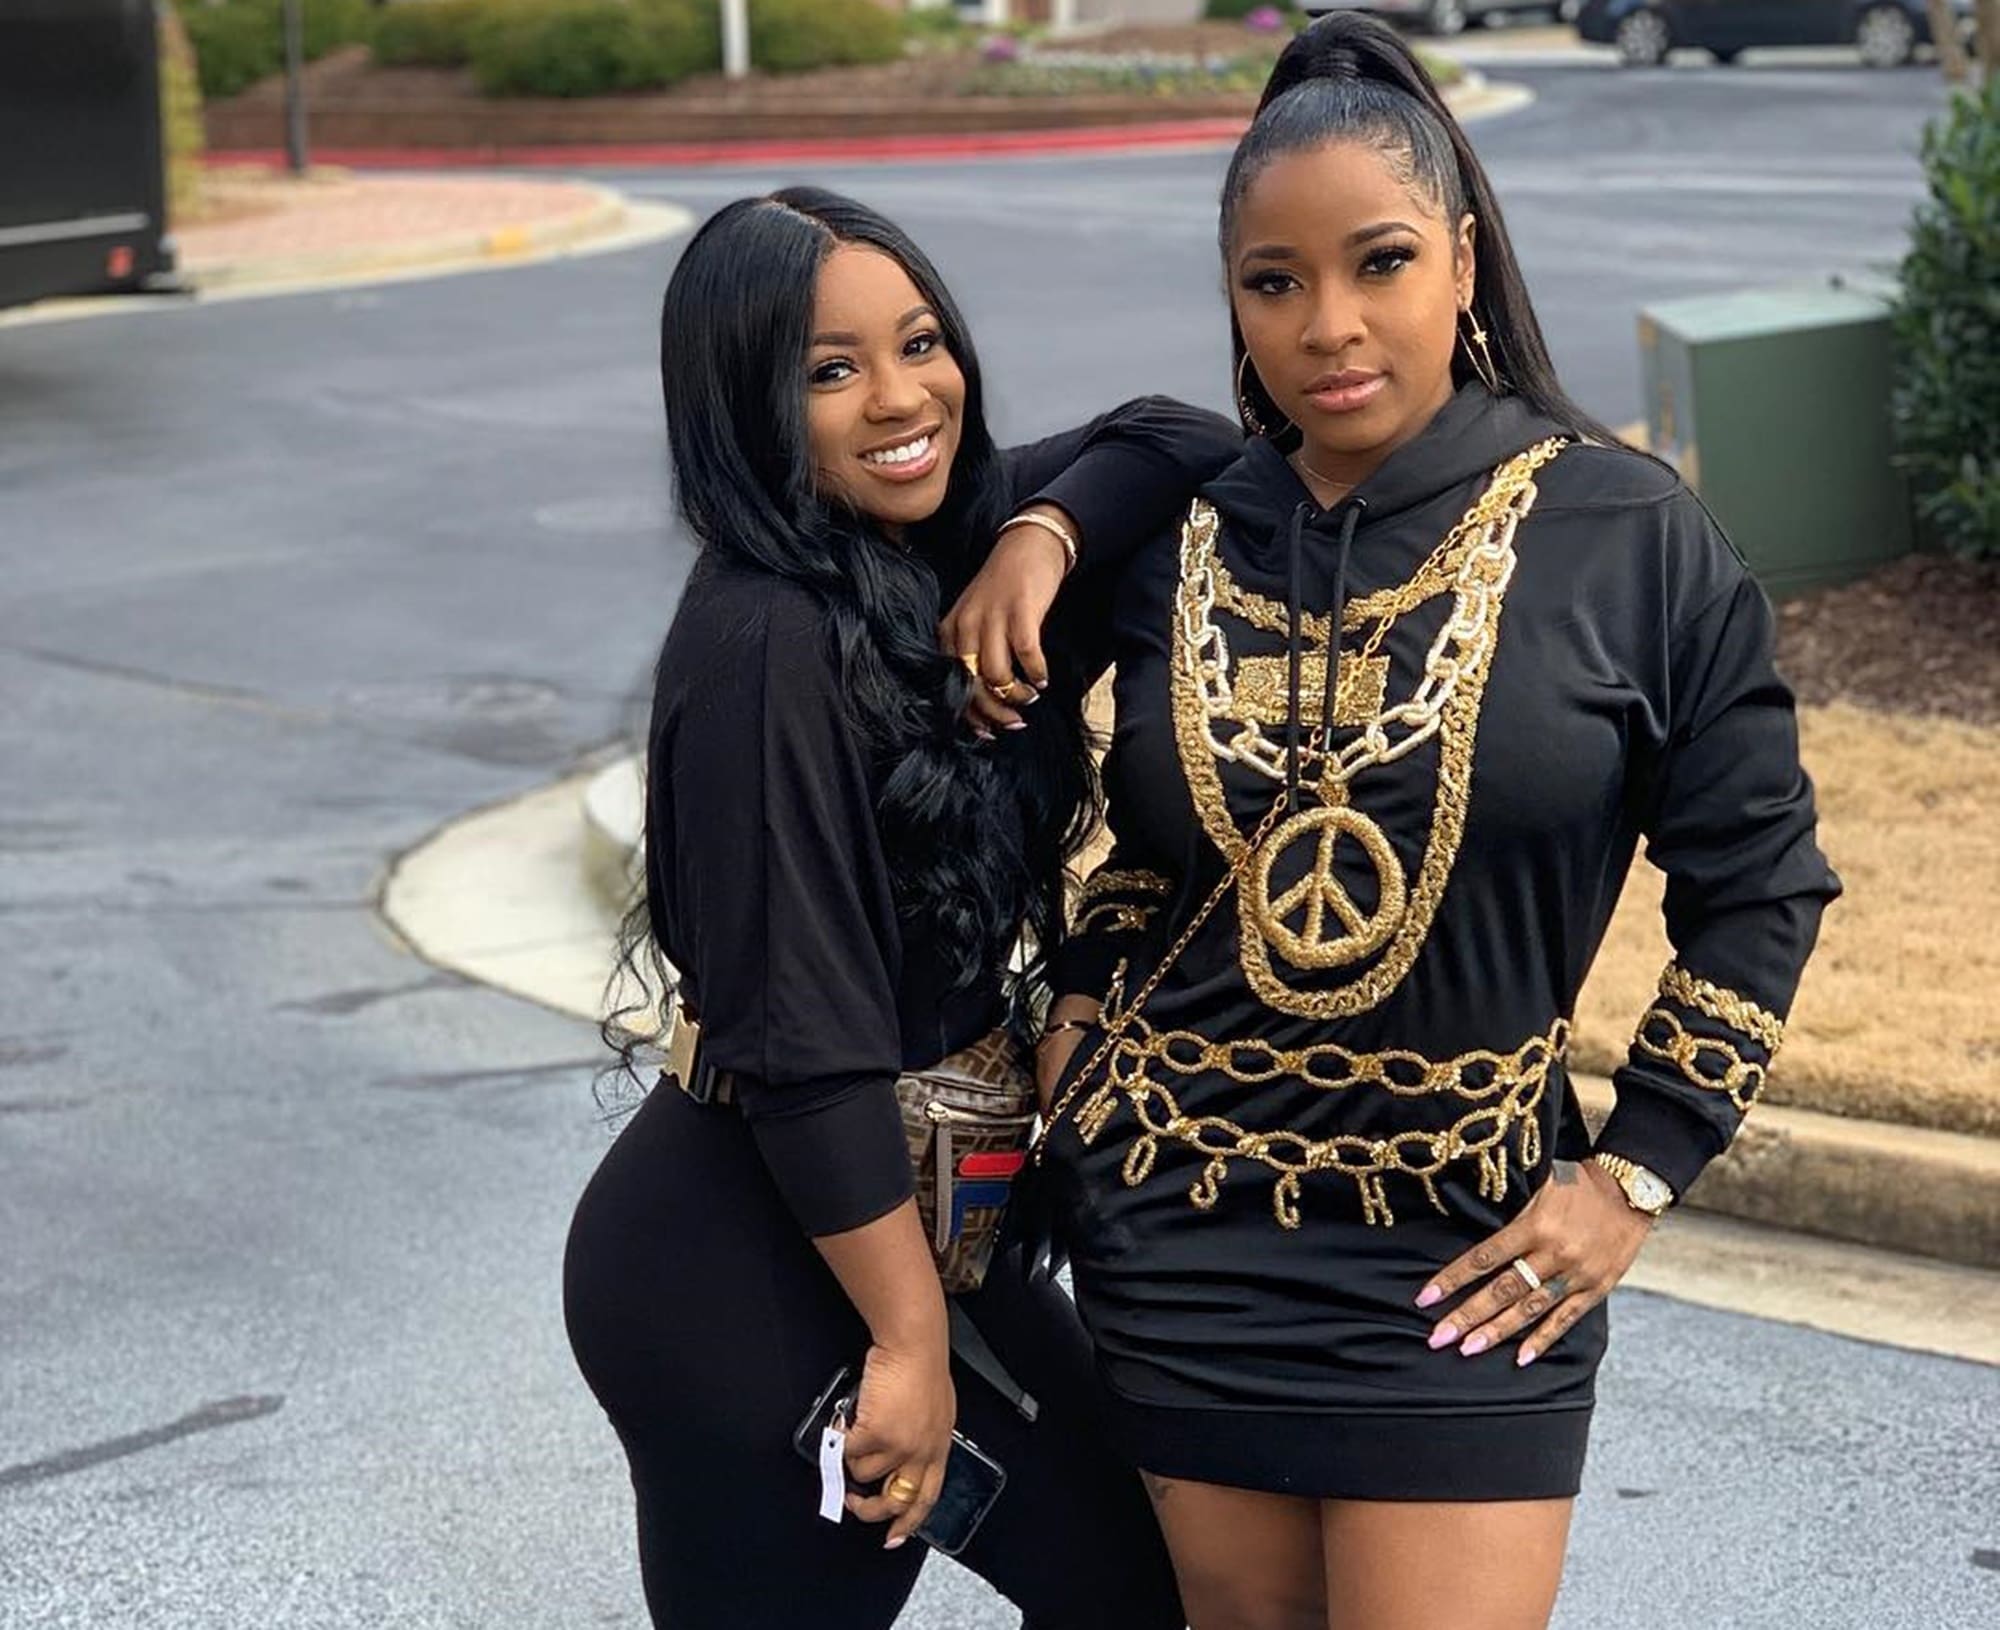 Toya Wright Tells Fans There Are No Babies Planned For Her Daughter After Boyfriend YFN Lucci Freaked Out Everyone Saying He Wants More Kids - Check Out The Funny Video With Toya & Nae